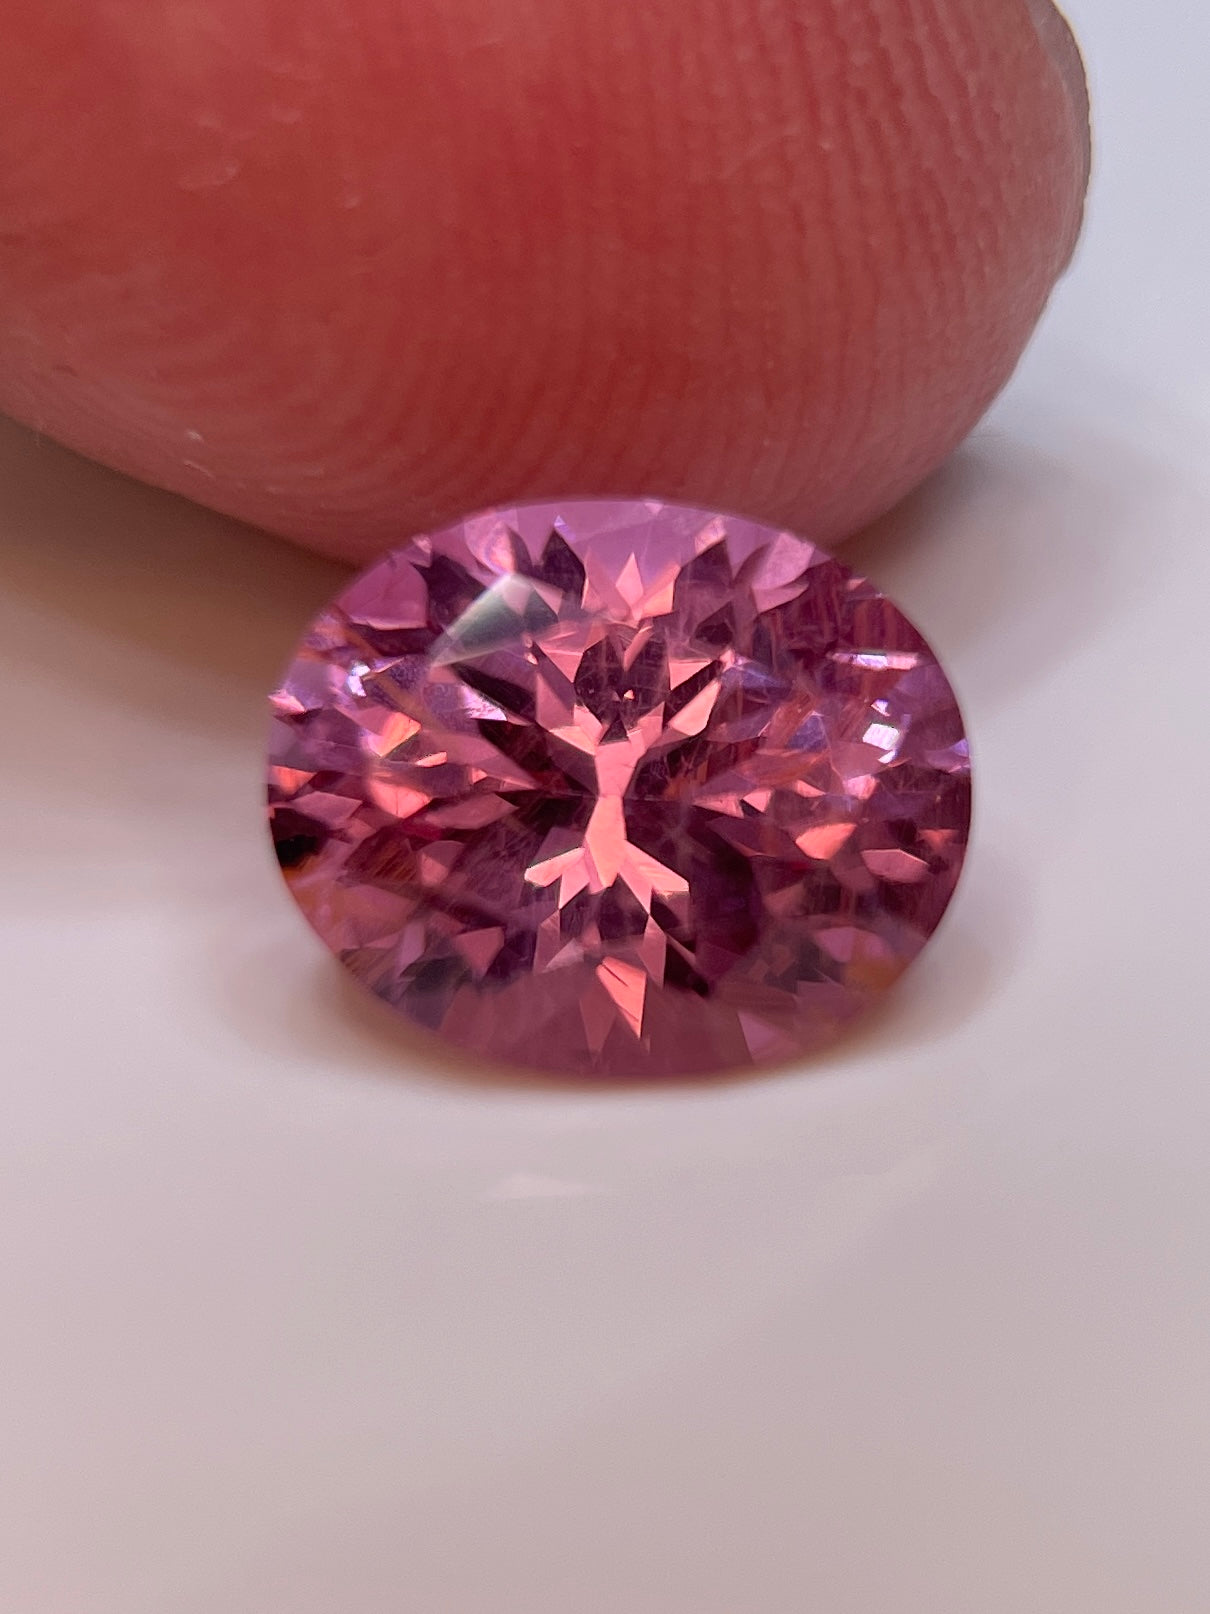 2.90Ct Mahenge Spinel Tanzania Untreated Unheated. Needles. Seems To Have A Colour Shift